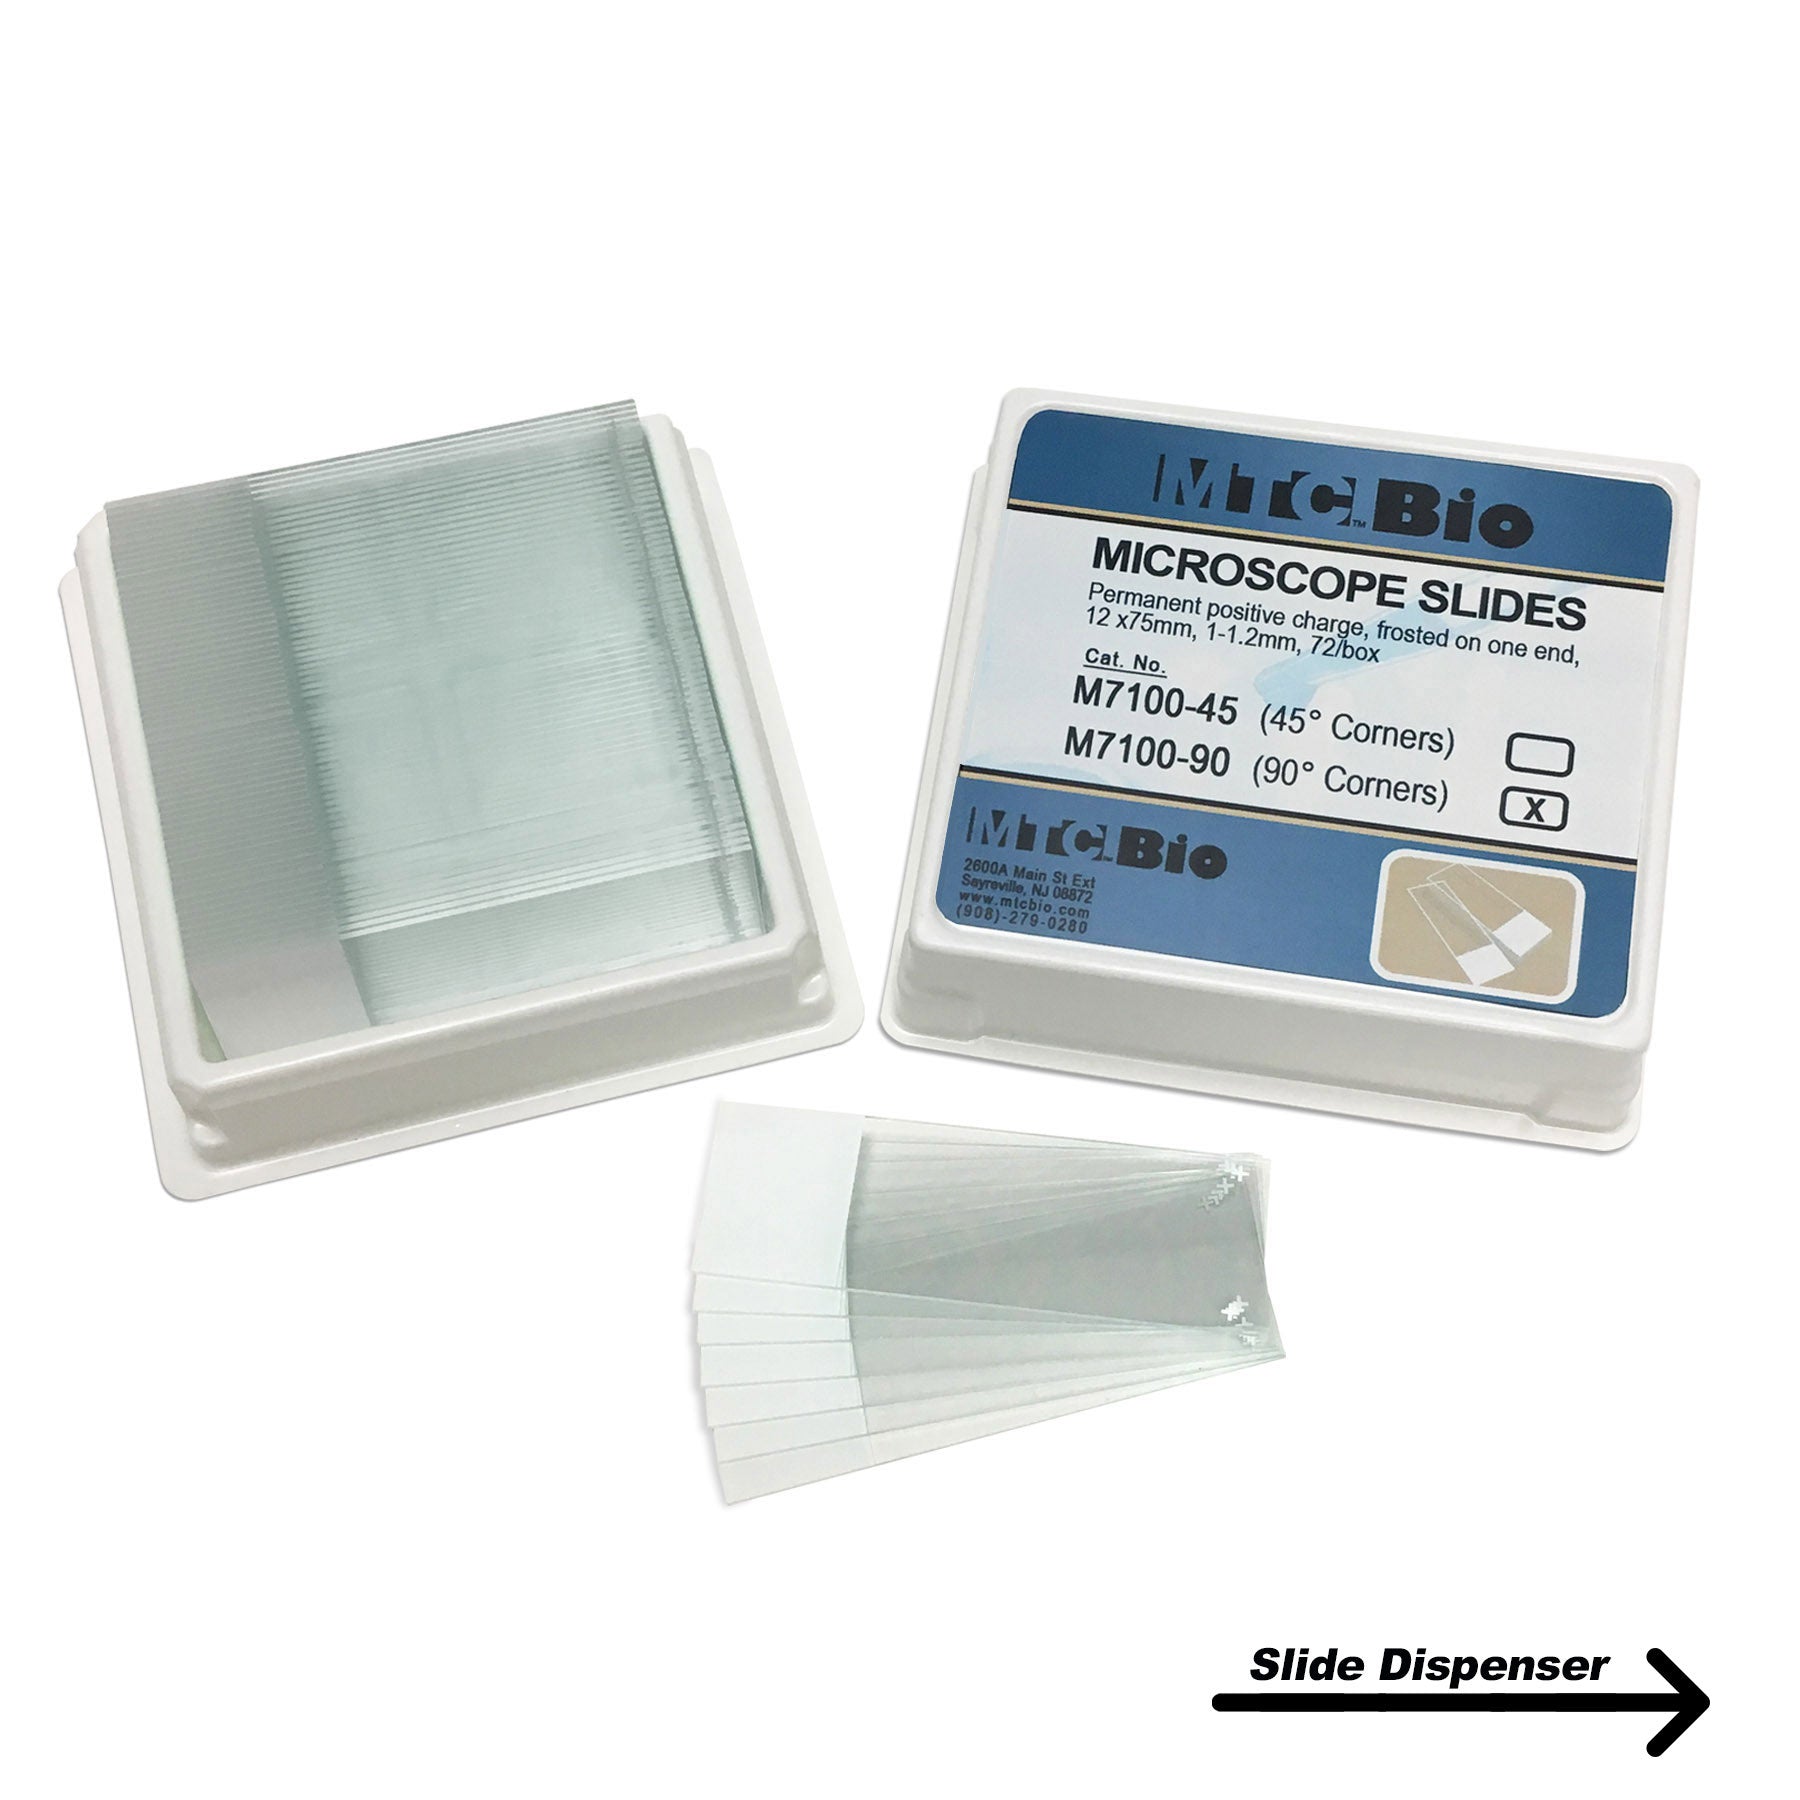 MTC Bio M7100-45, Microscope Slides, Positive Charged, 45° Corners, Frosted On One End, 25 x 75mm, 72/pk